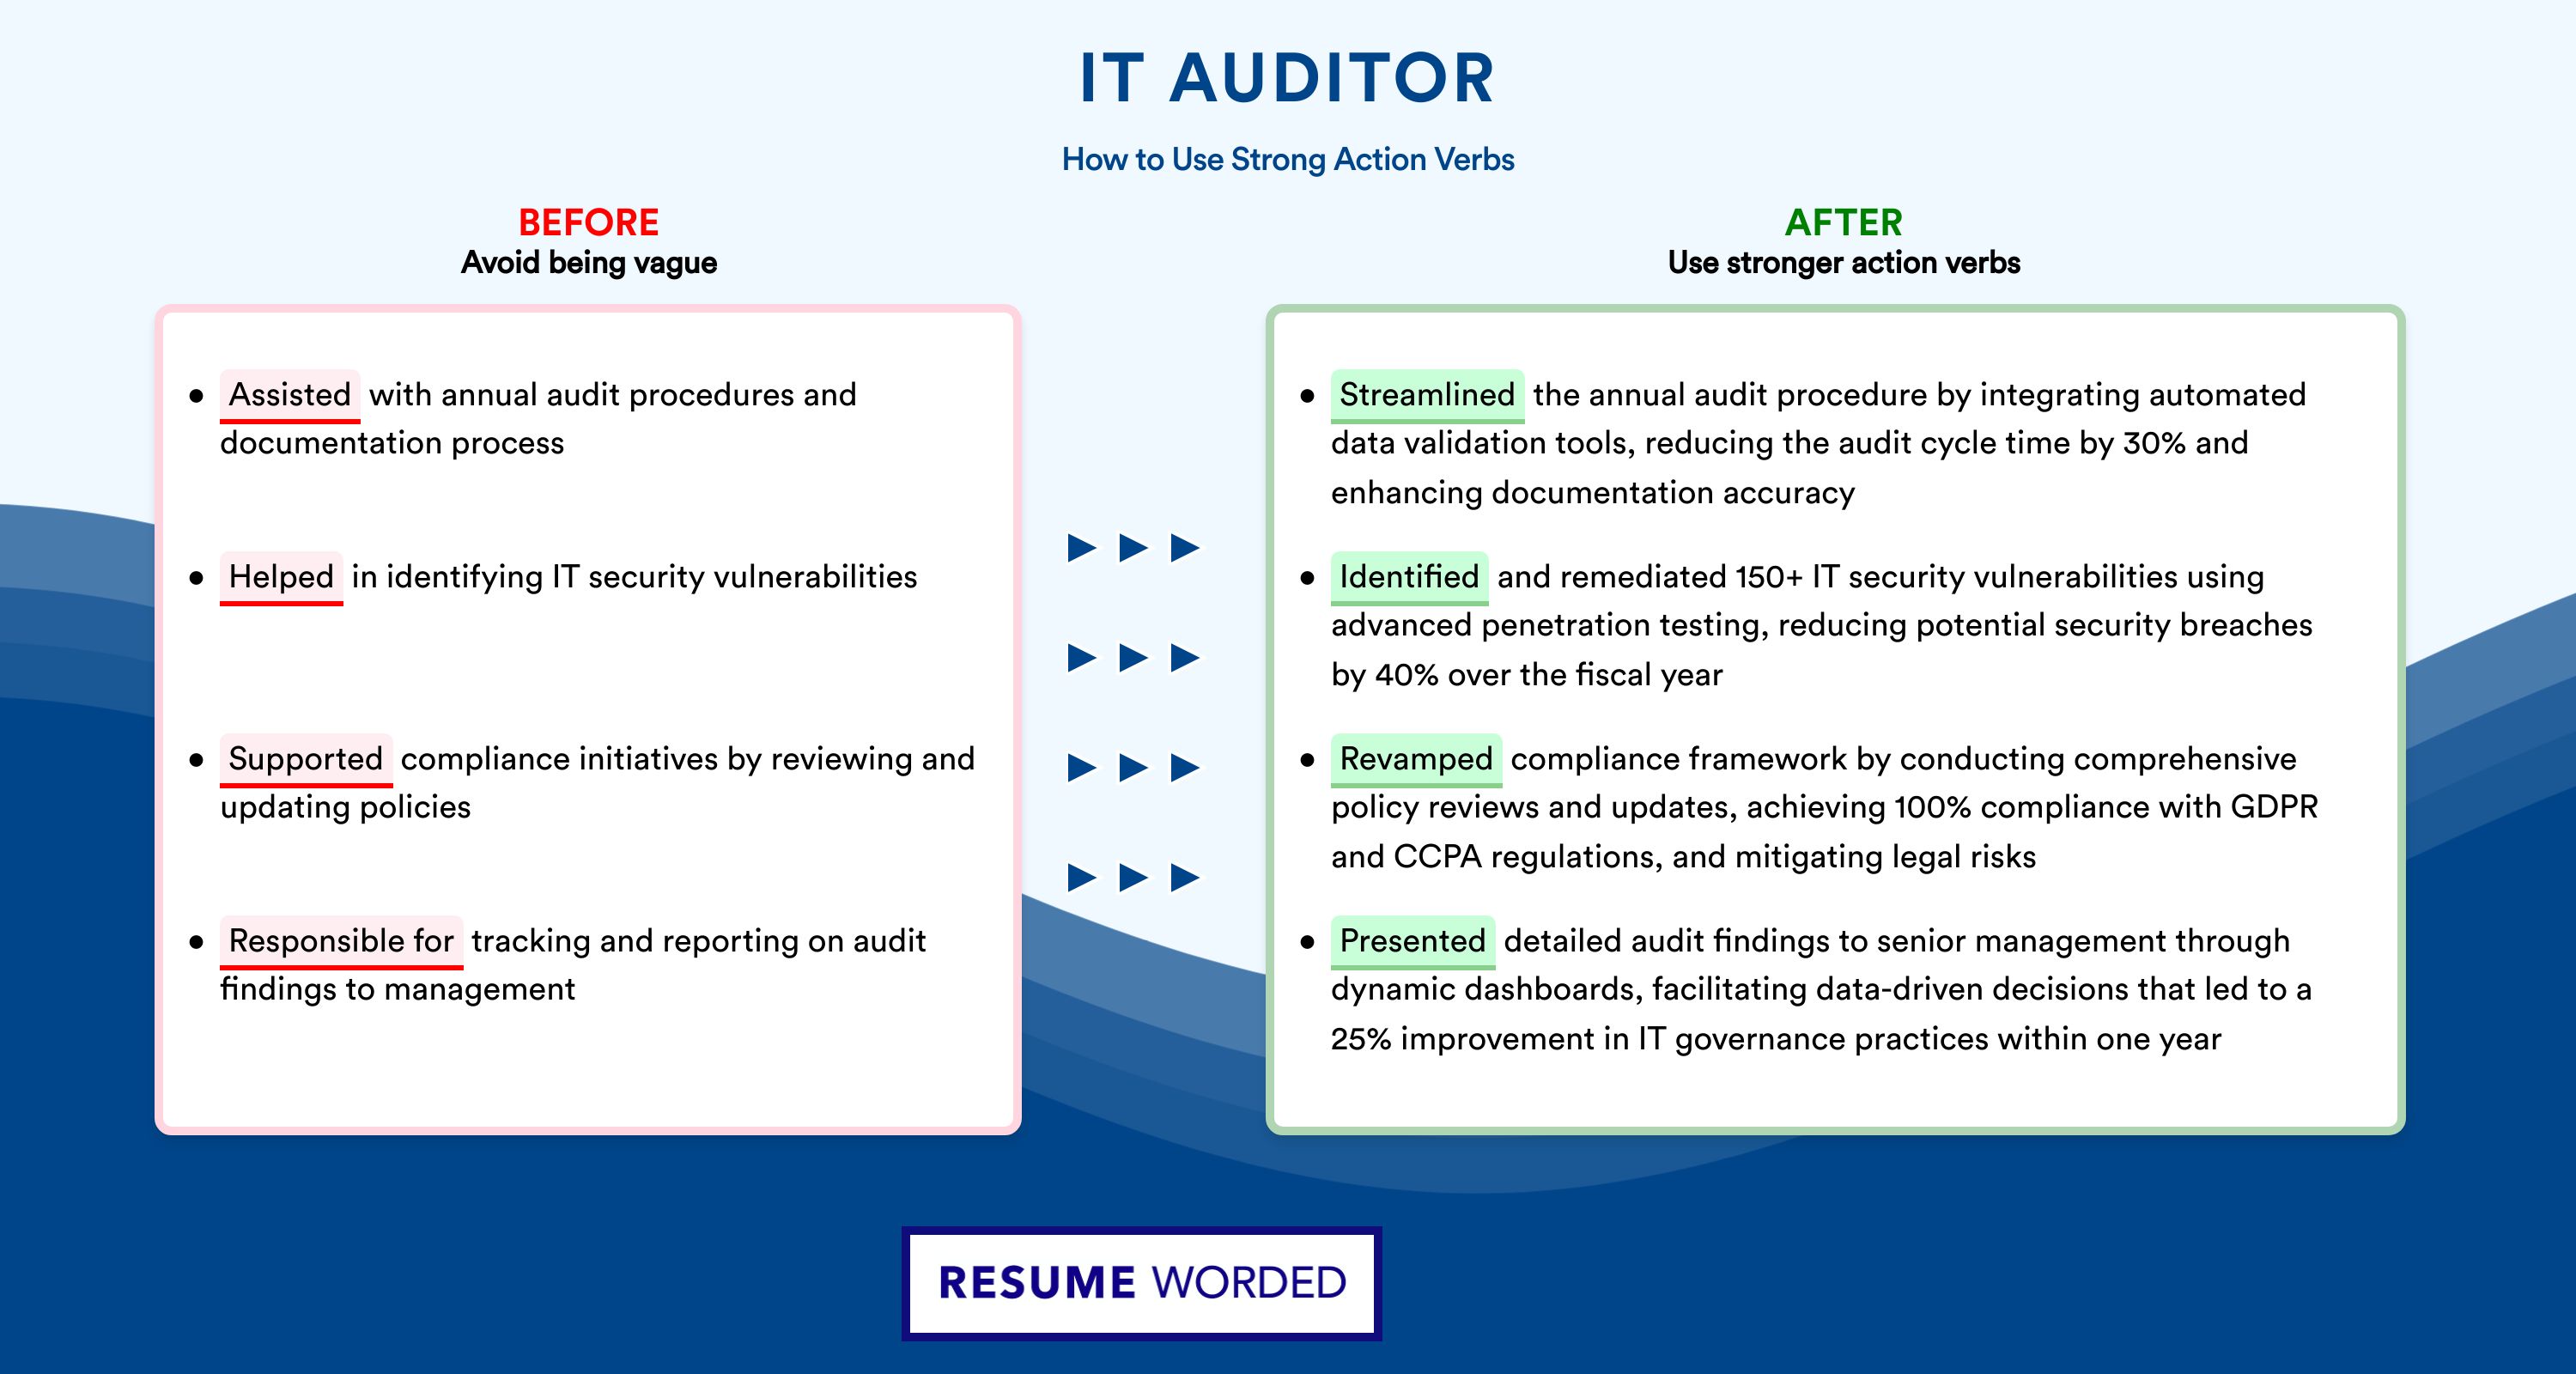 Action Verbs for IT Auditor